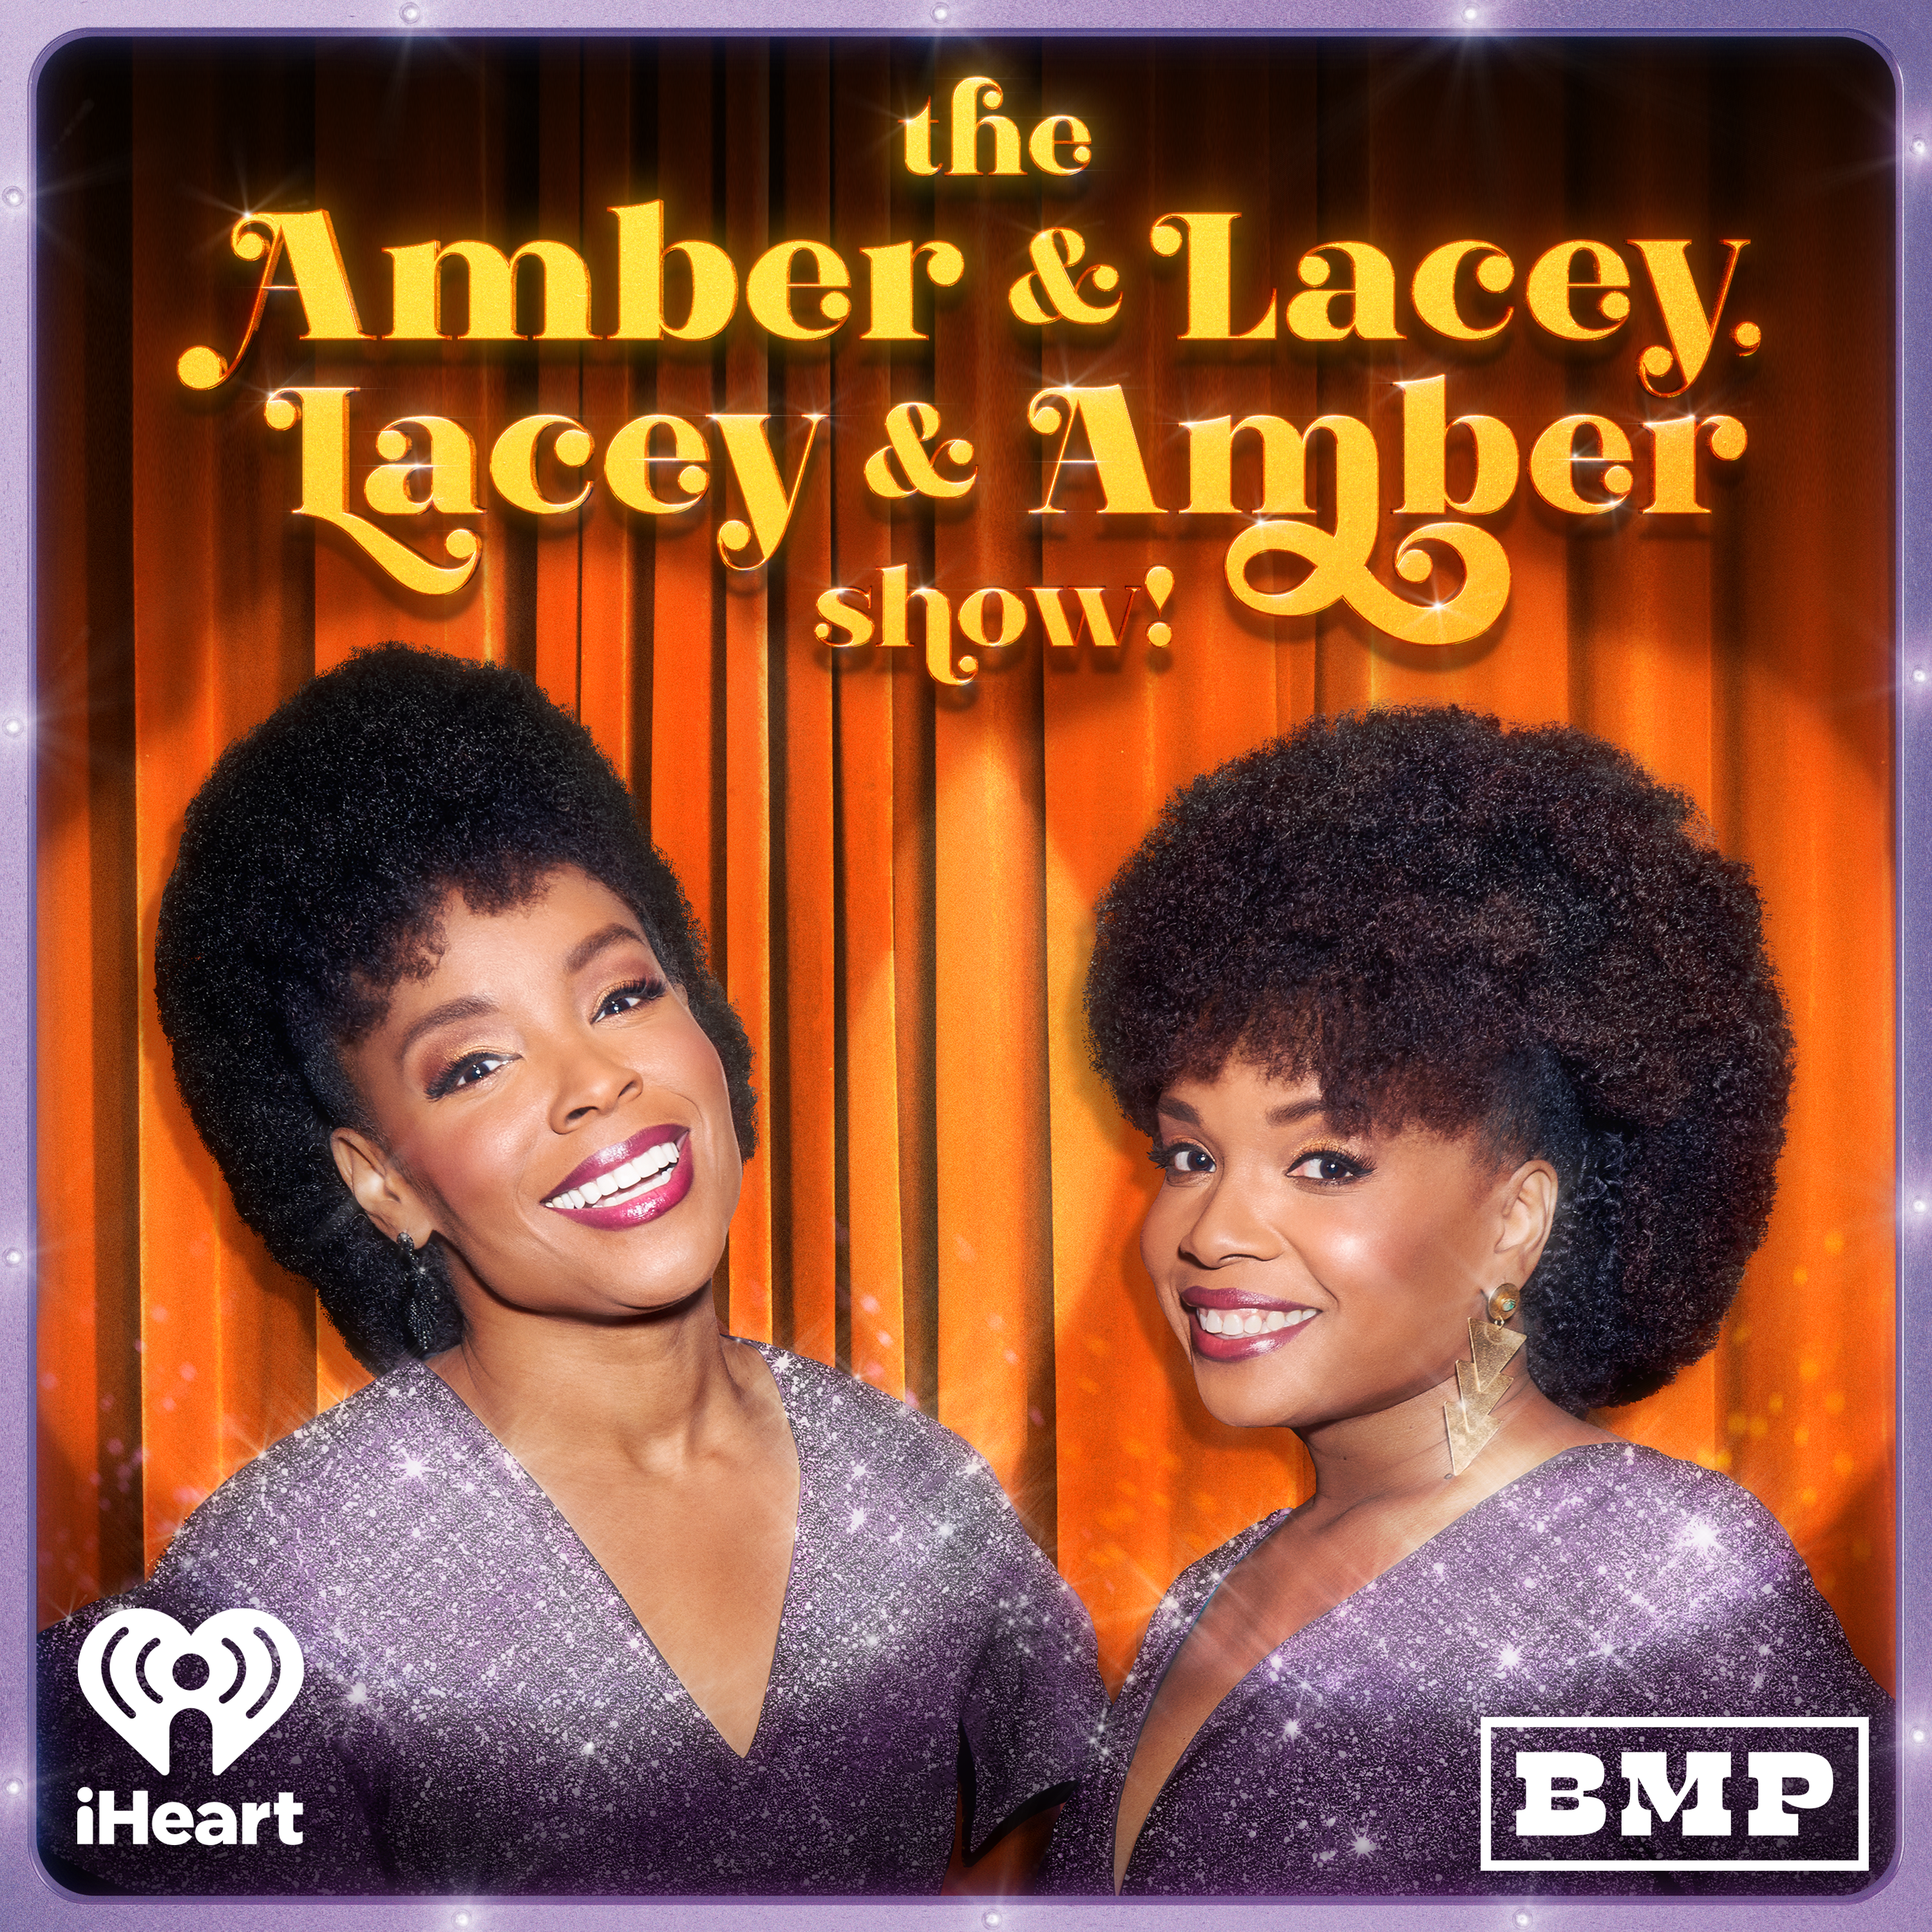 A Bridge Over Troubled Waters: This Week's Unbelievable Story From Amber Ruffin & Lacey Lamar